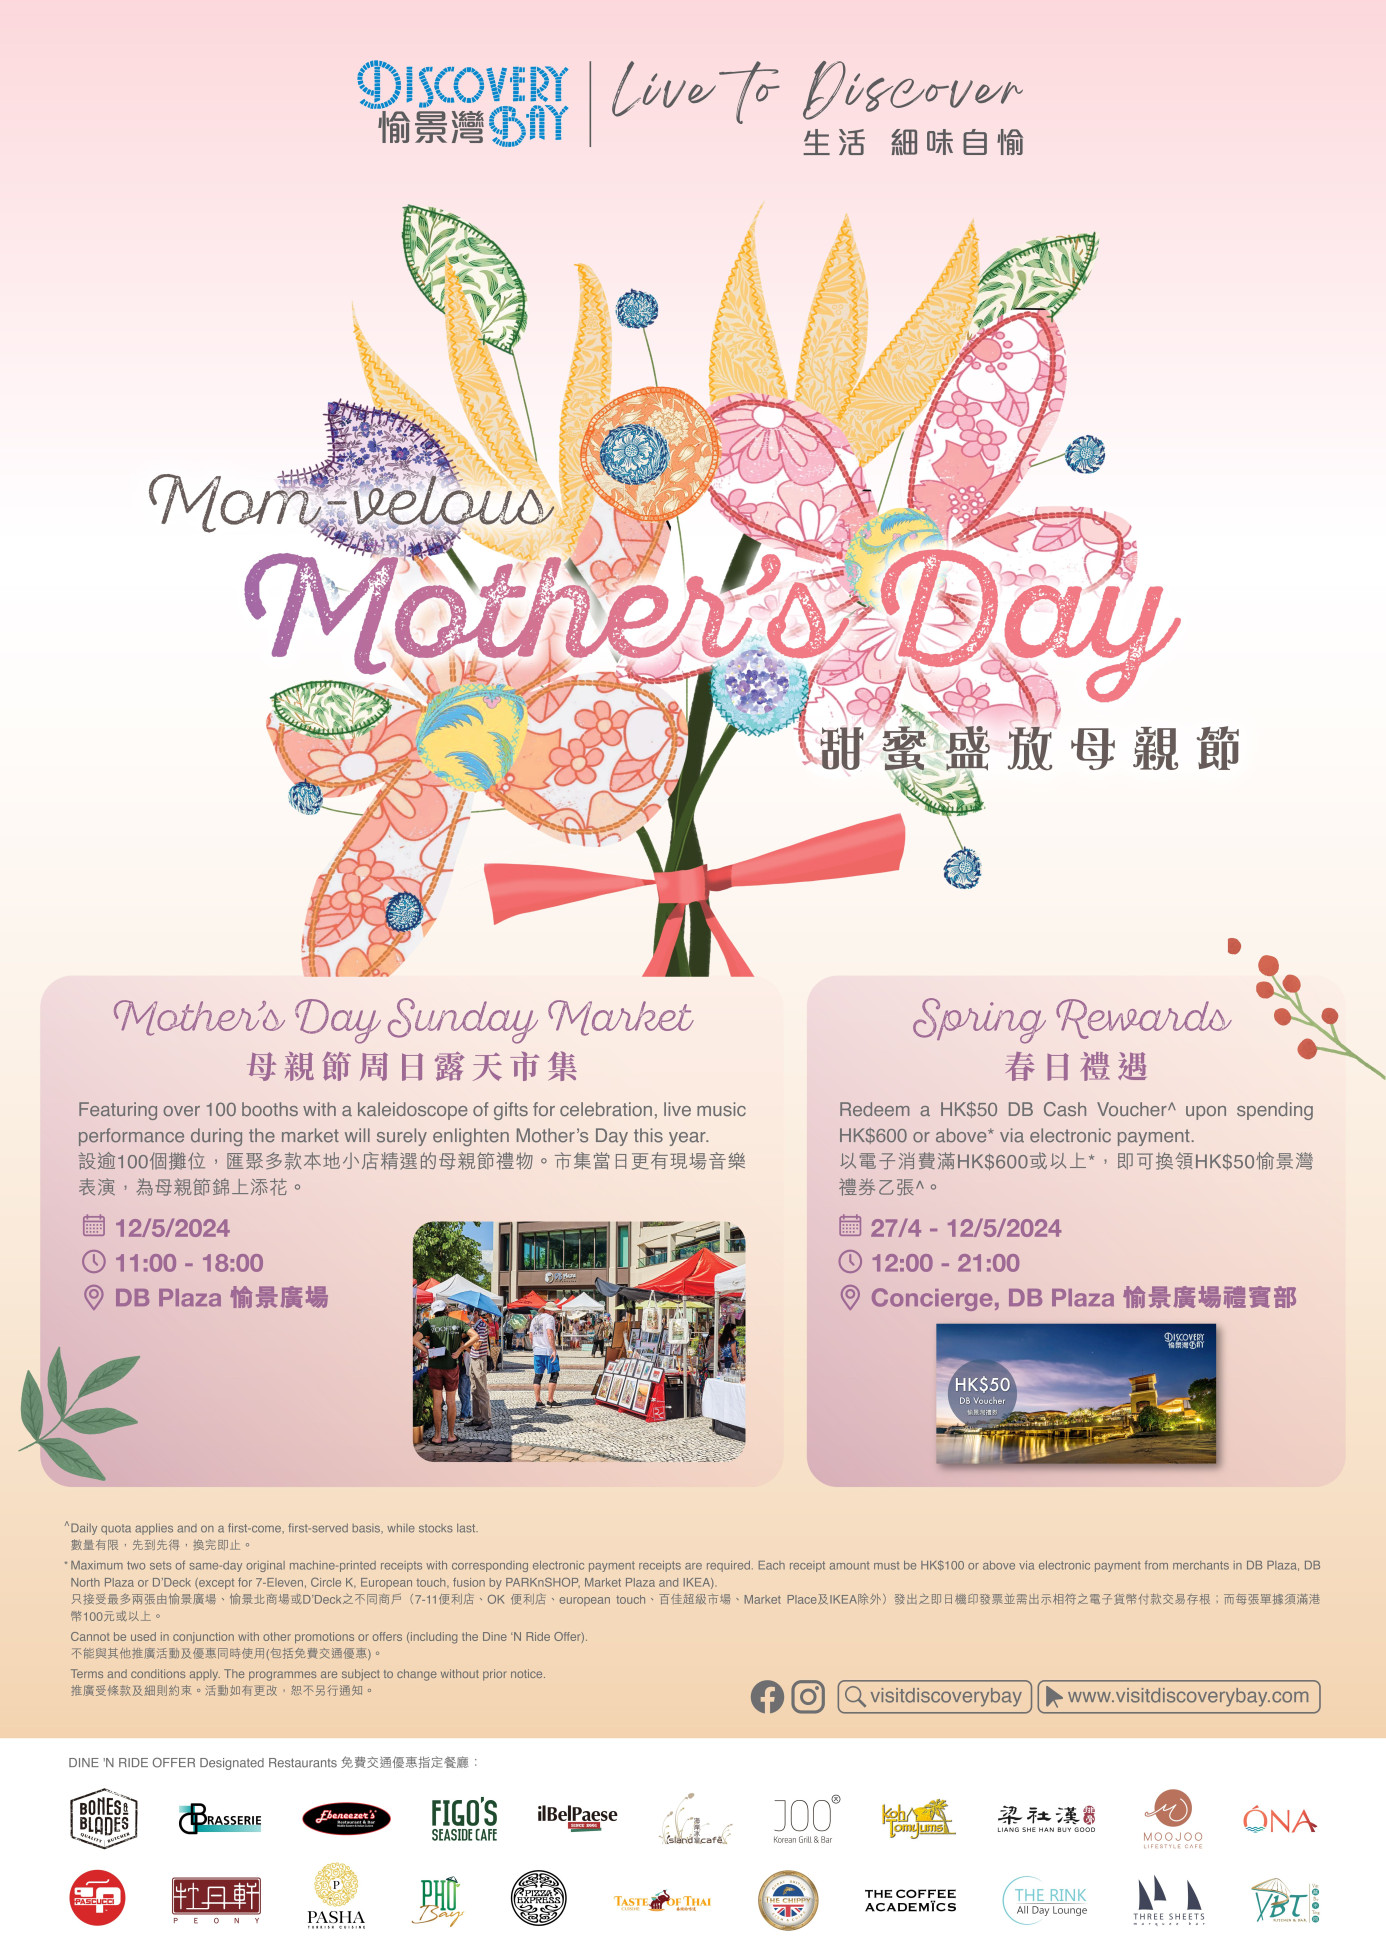 Mom-velous Mother’s Day at Discovery Bay 2024 